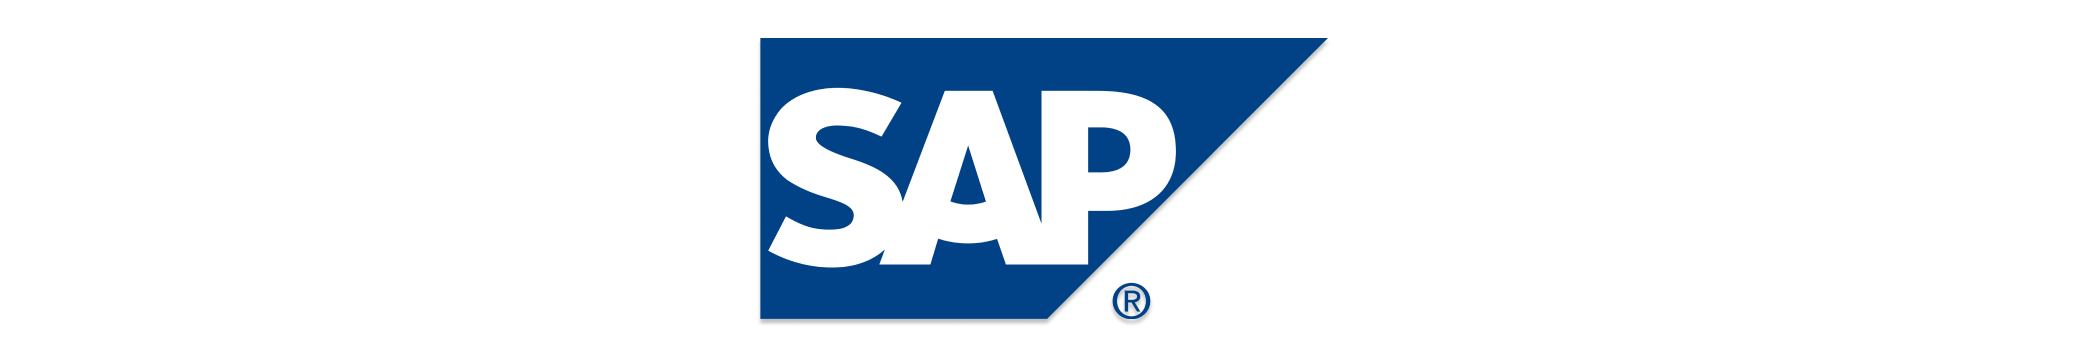 Your Starter Guide to Developing a Winning MedTech Software Product - sap